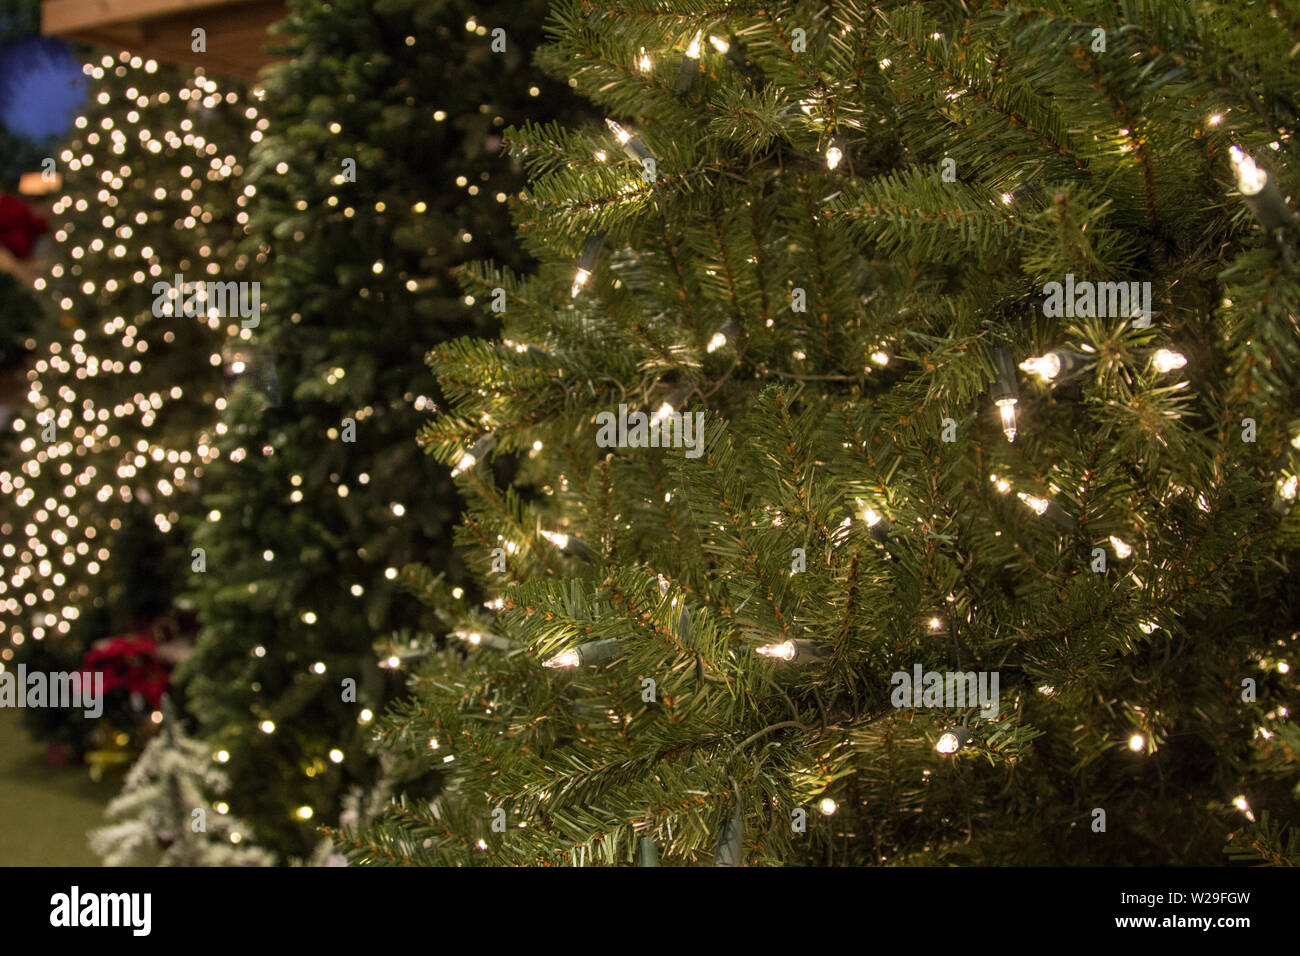 Picking Out The Perfect Christmas Tree. Row of illuminated artificial Christmas trees for sale Stock Photo